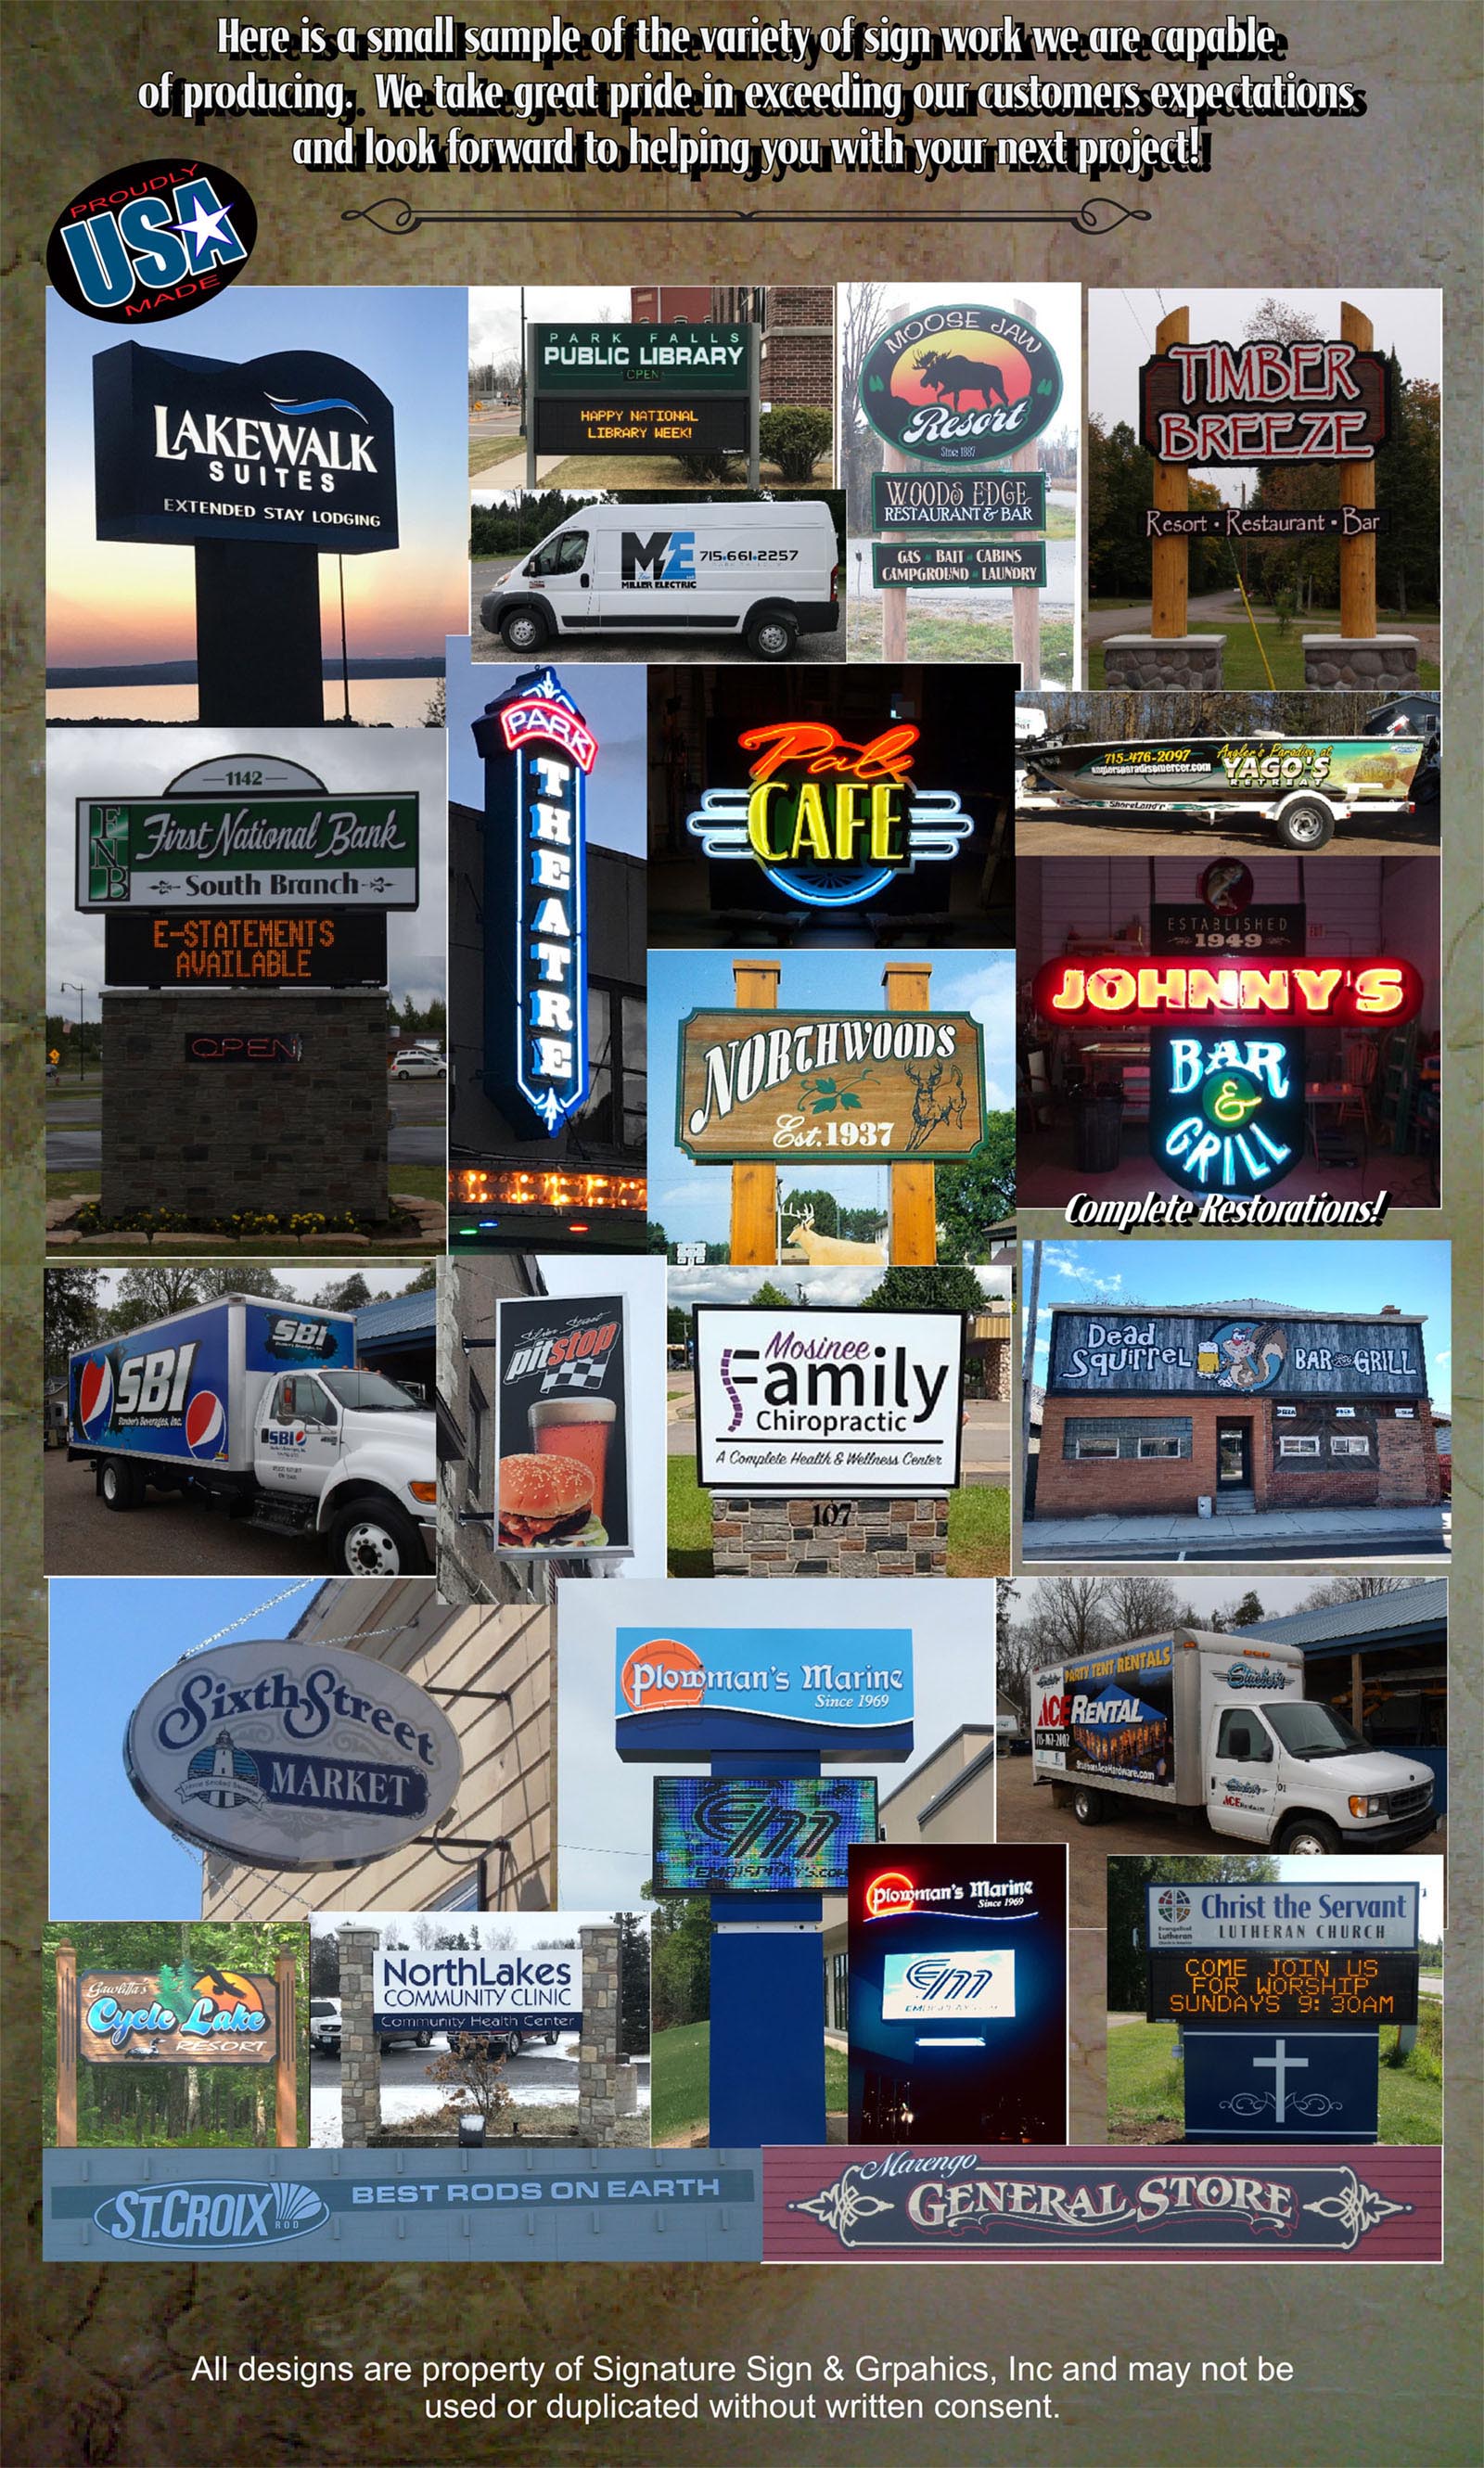 Custom signs. Signage. Sign repair. Sign installation. Neop signs. LED signs. Pylon signs. Backlit signs. Backlit cabinet signs. Sandblasted signs. Routed signs. Carved signs, panel signs, sign extrusion, plastic face signs, painted signs, flourescent signs, HDU signs, plastic letters, metal letters. Formed plastic letter, banner, billboards, road arrows, vehicle graphics, post and panel signs, site surveys, commercial signs.